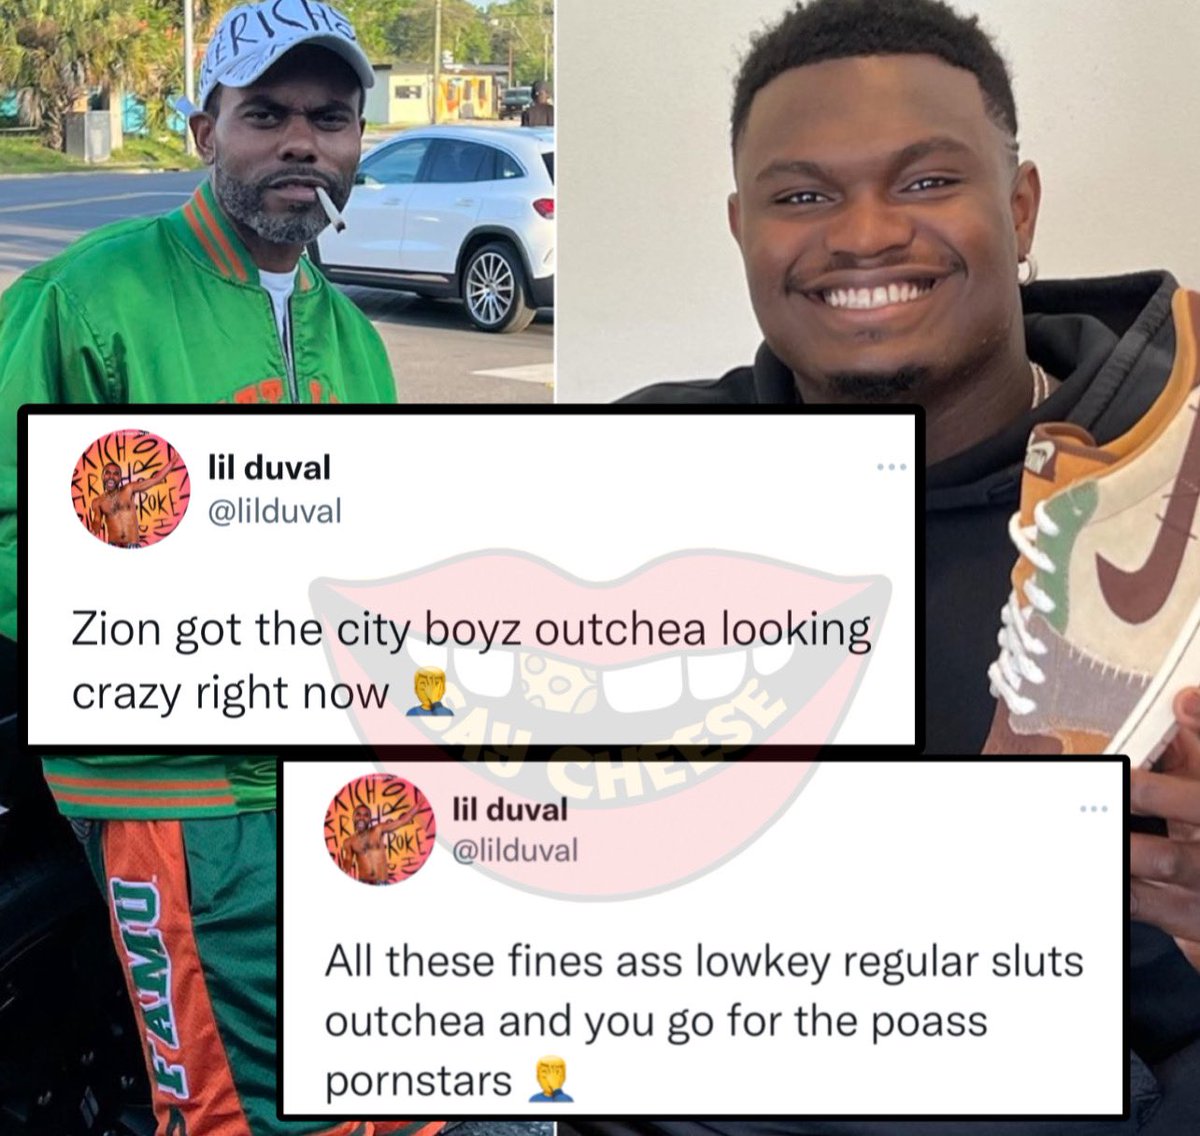 Lil Duval speaks on Zion Williamson: “All these fine a** lowkey regular sluts out here & you go for the poor a** pornstar”